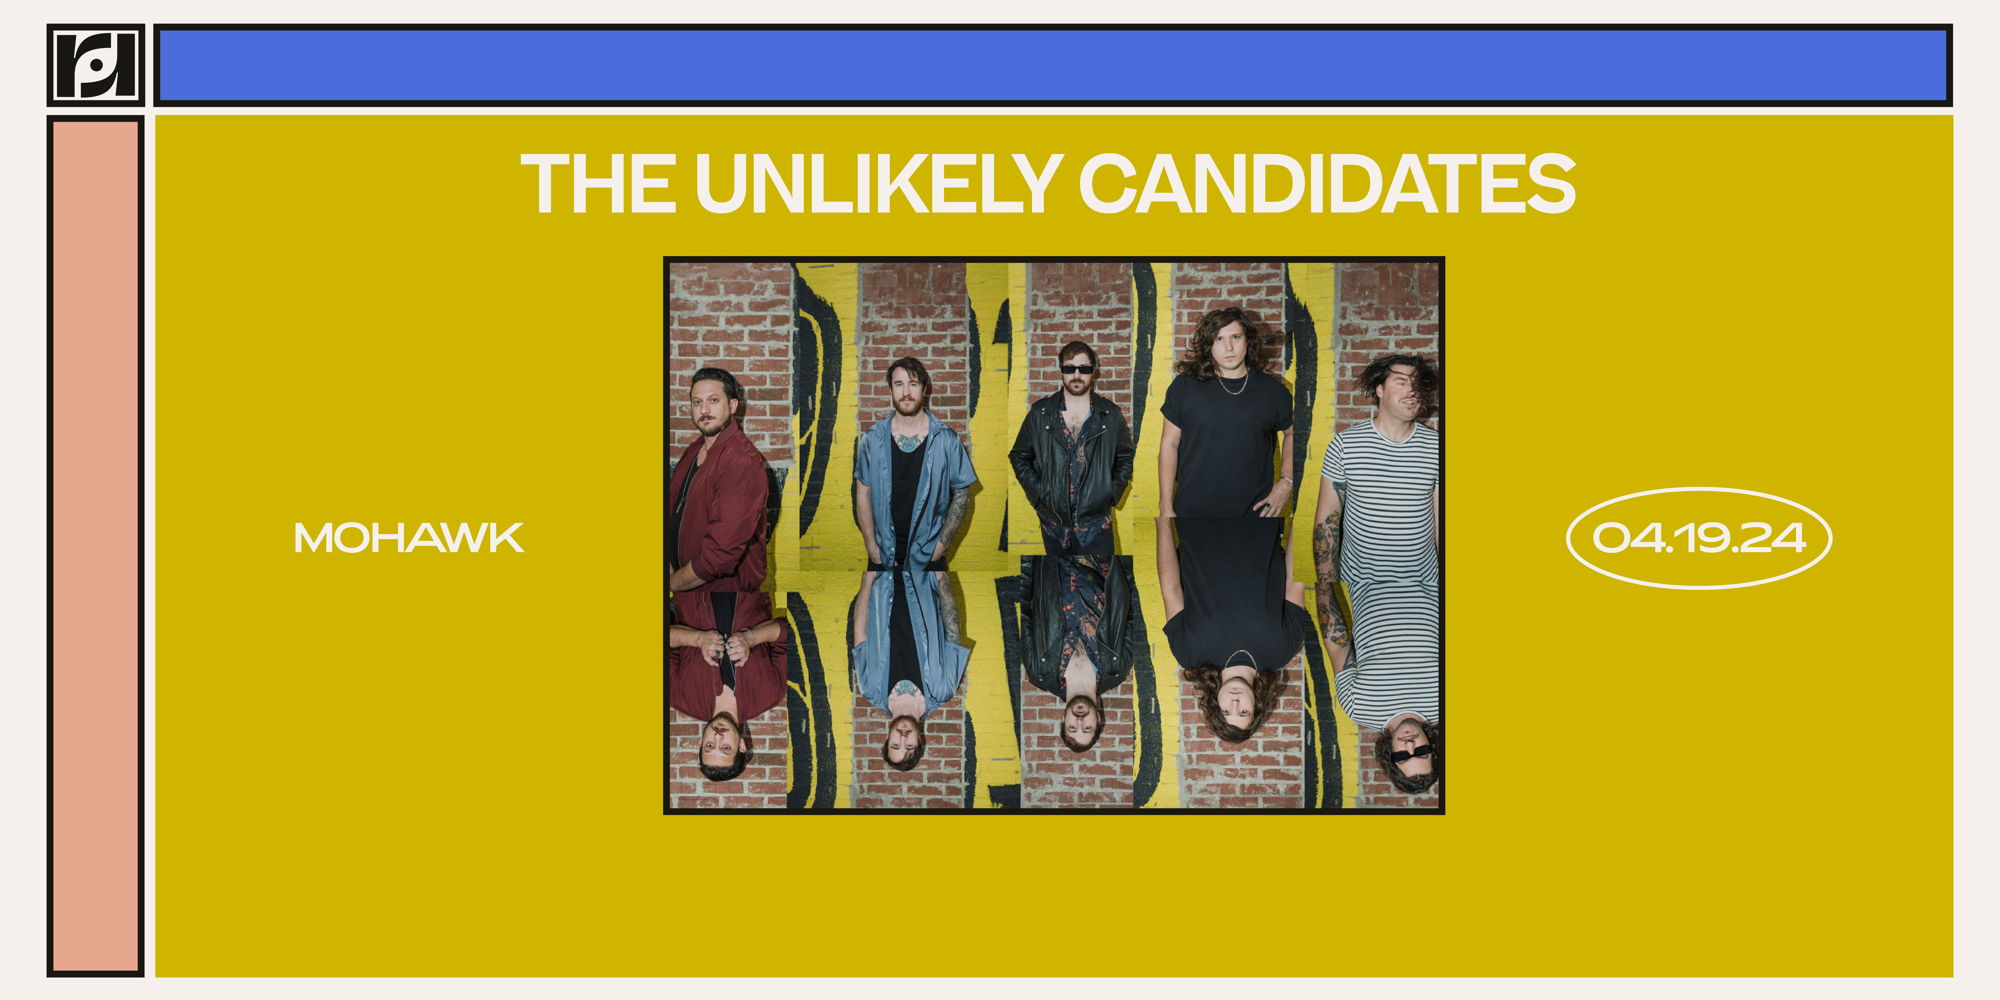 Resound Presents: The Unlikely Candidates at Mohawk promotional image